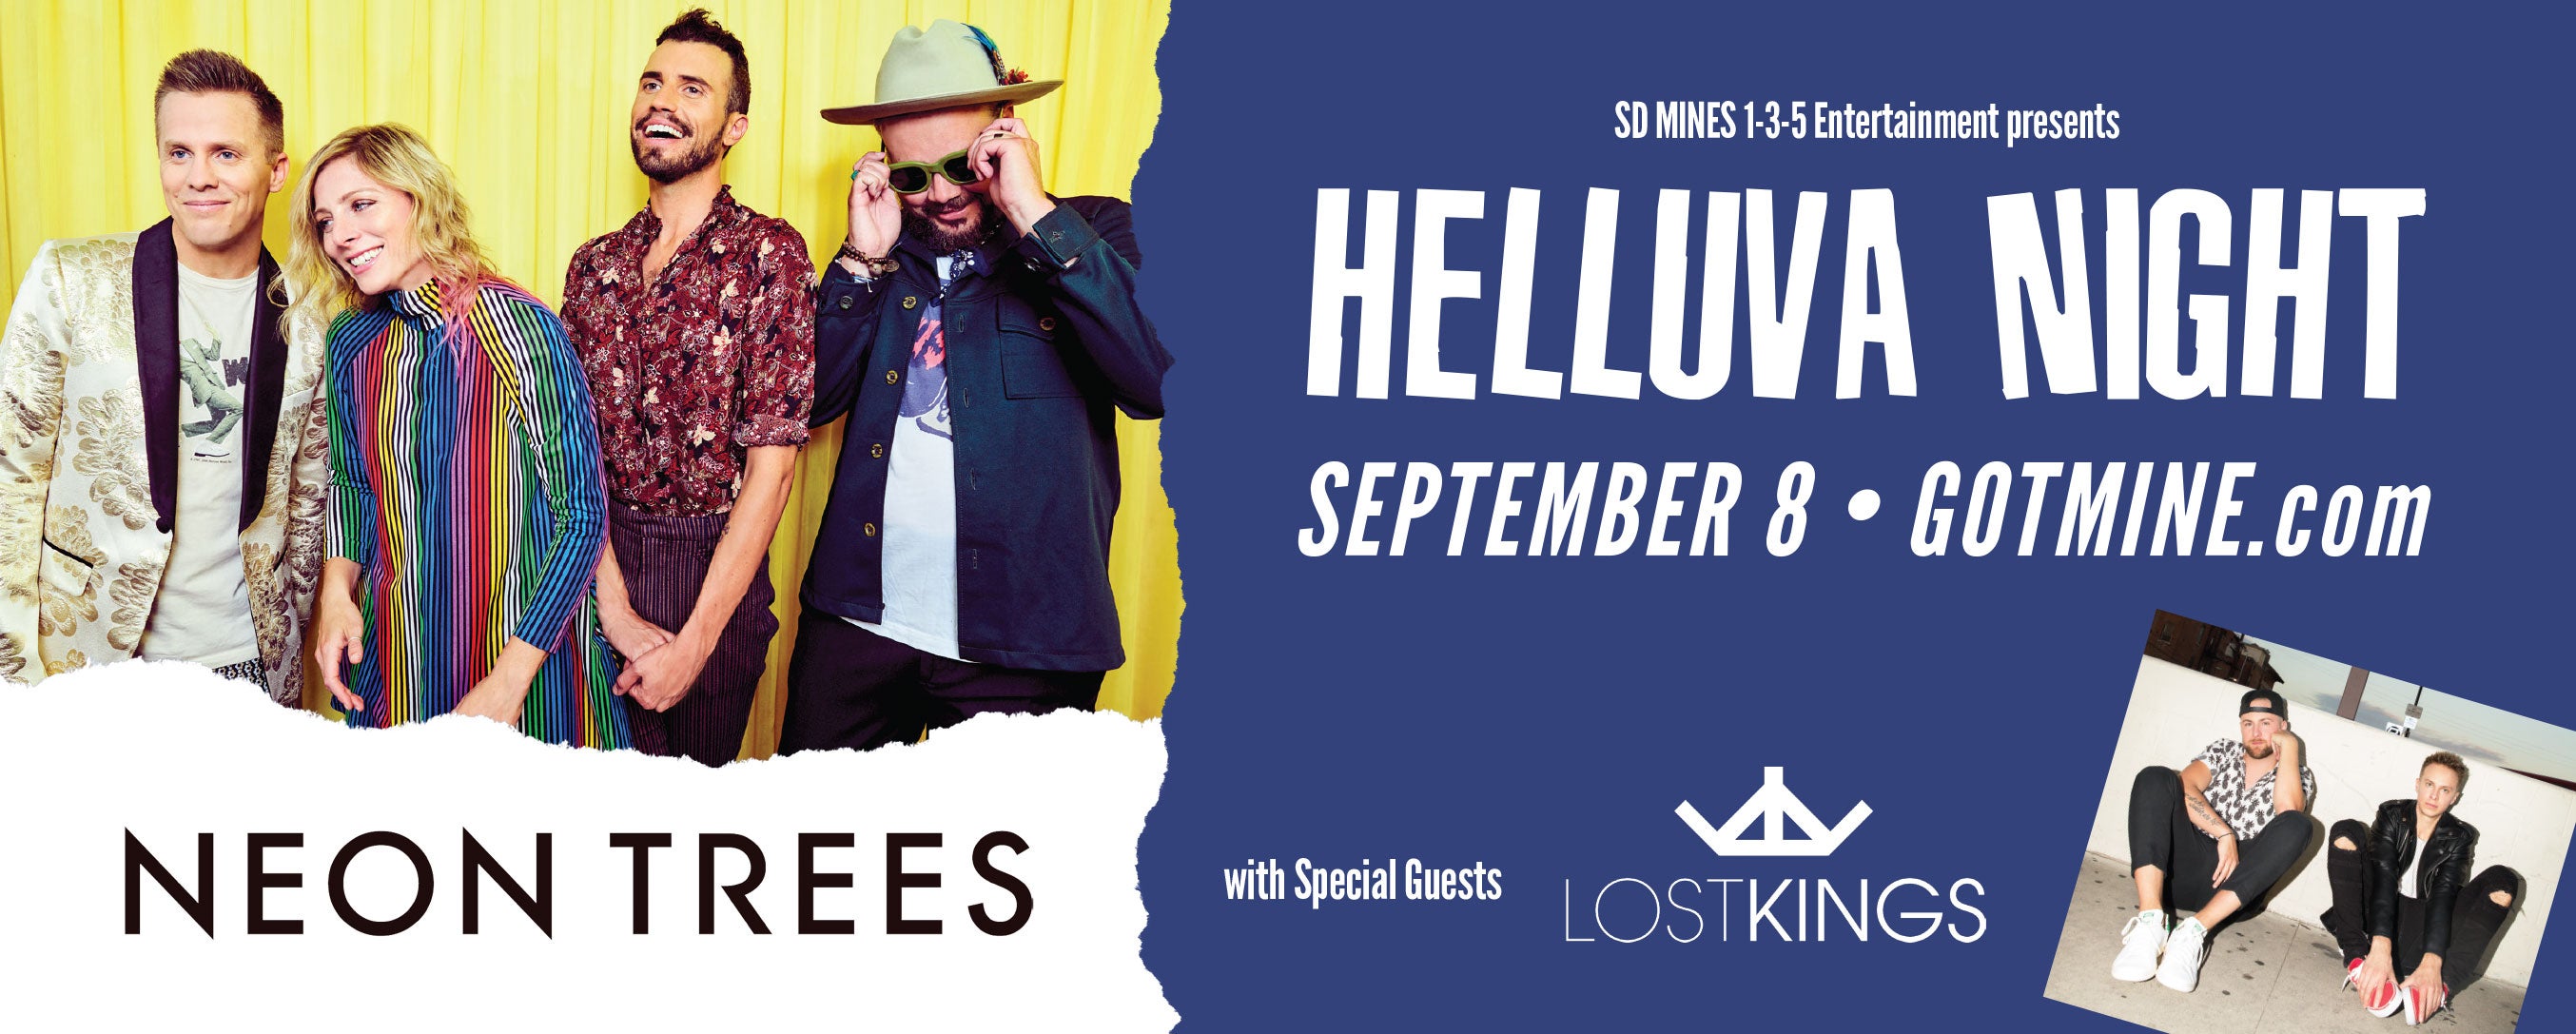 HELLUVA NIGHT featuring Neon Trees with Special Guest Lost Kings